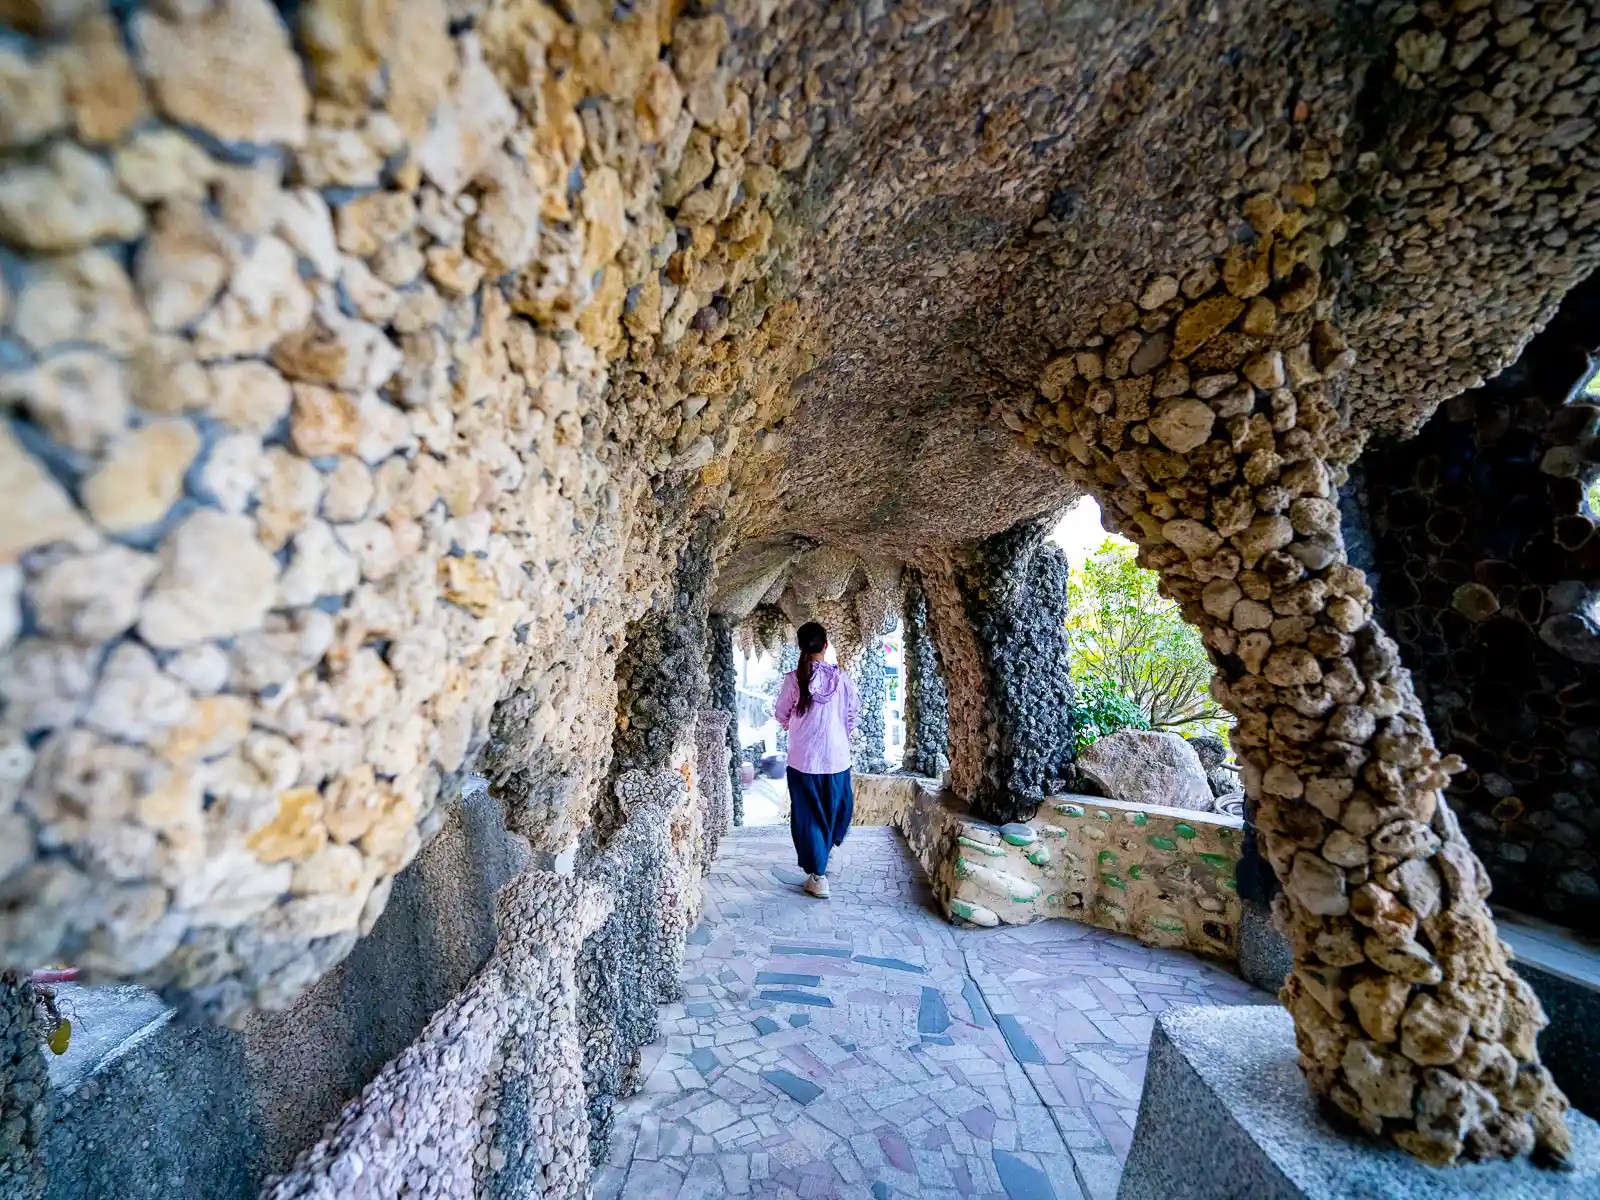 A tourist walks through an arcade constructed of small fist-size pieces of coral.